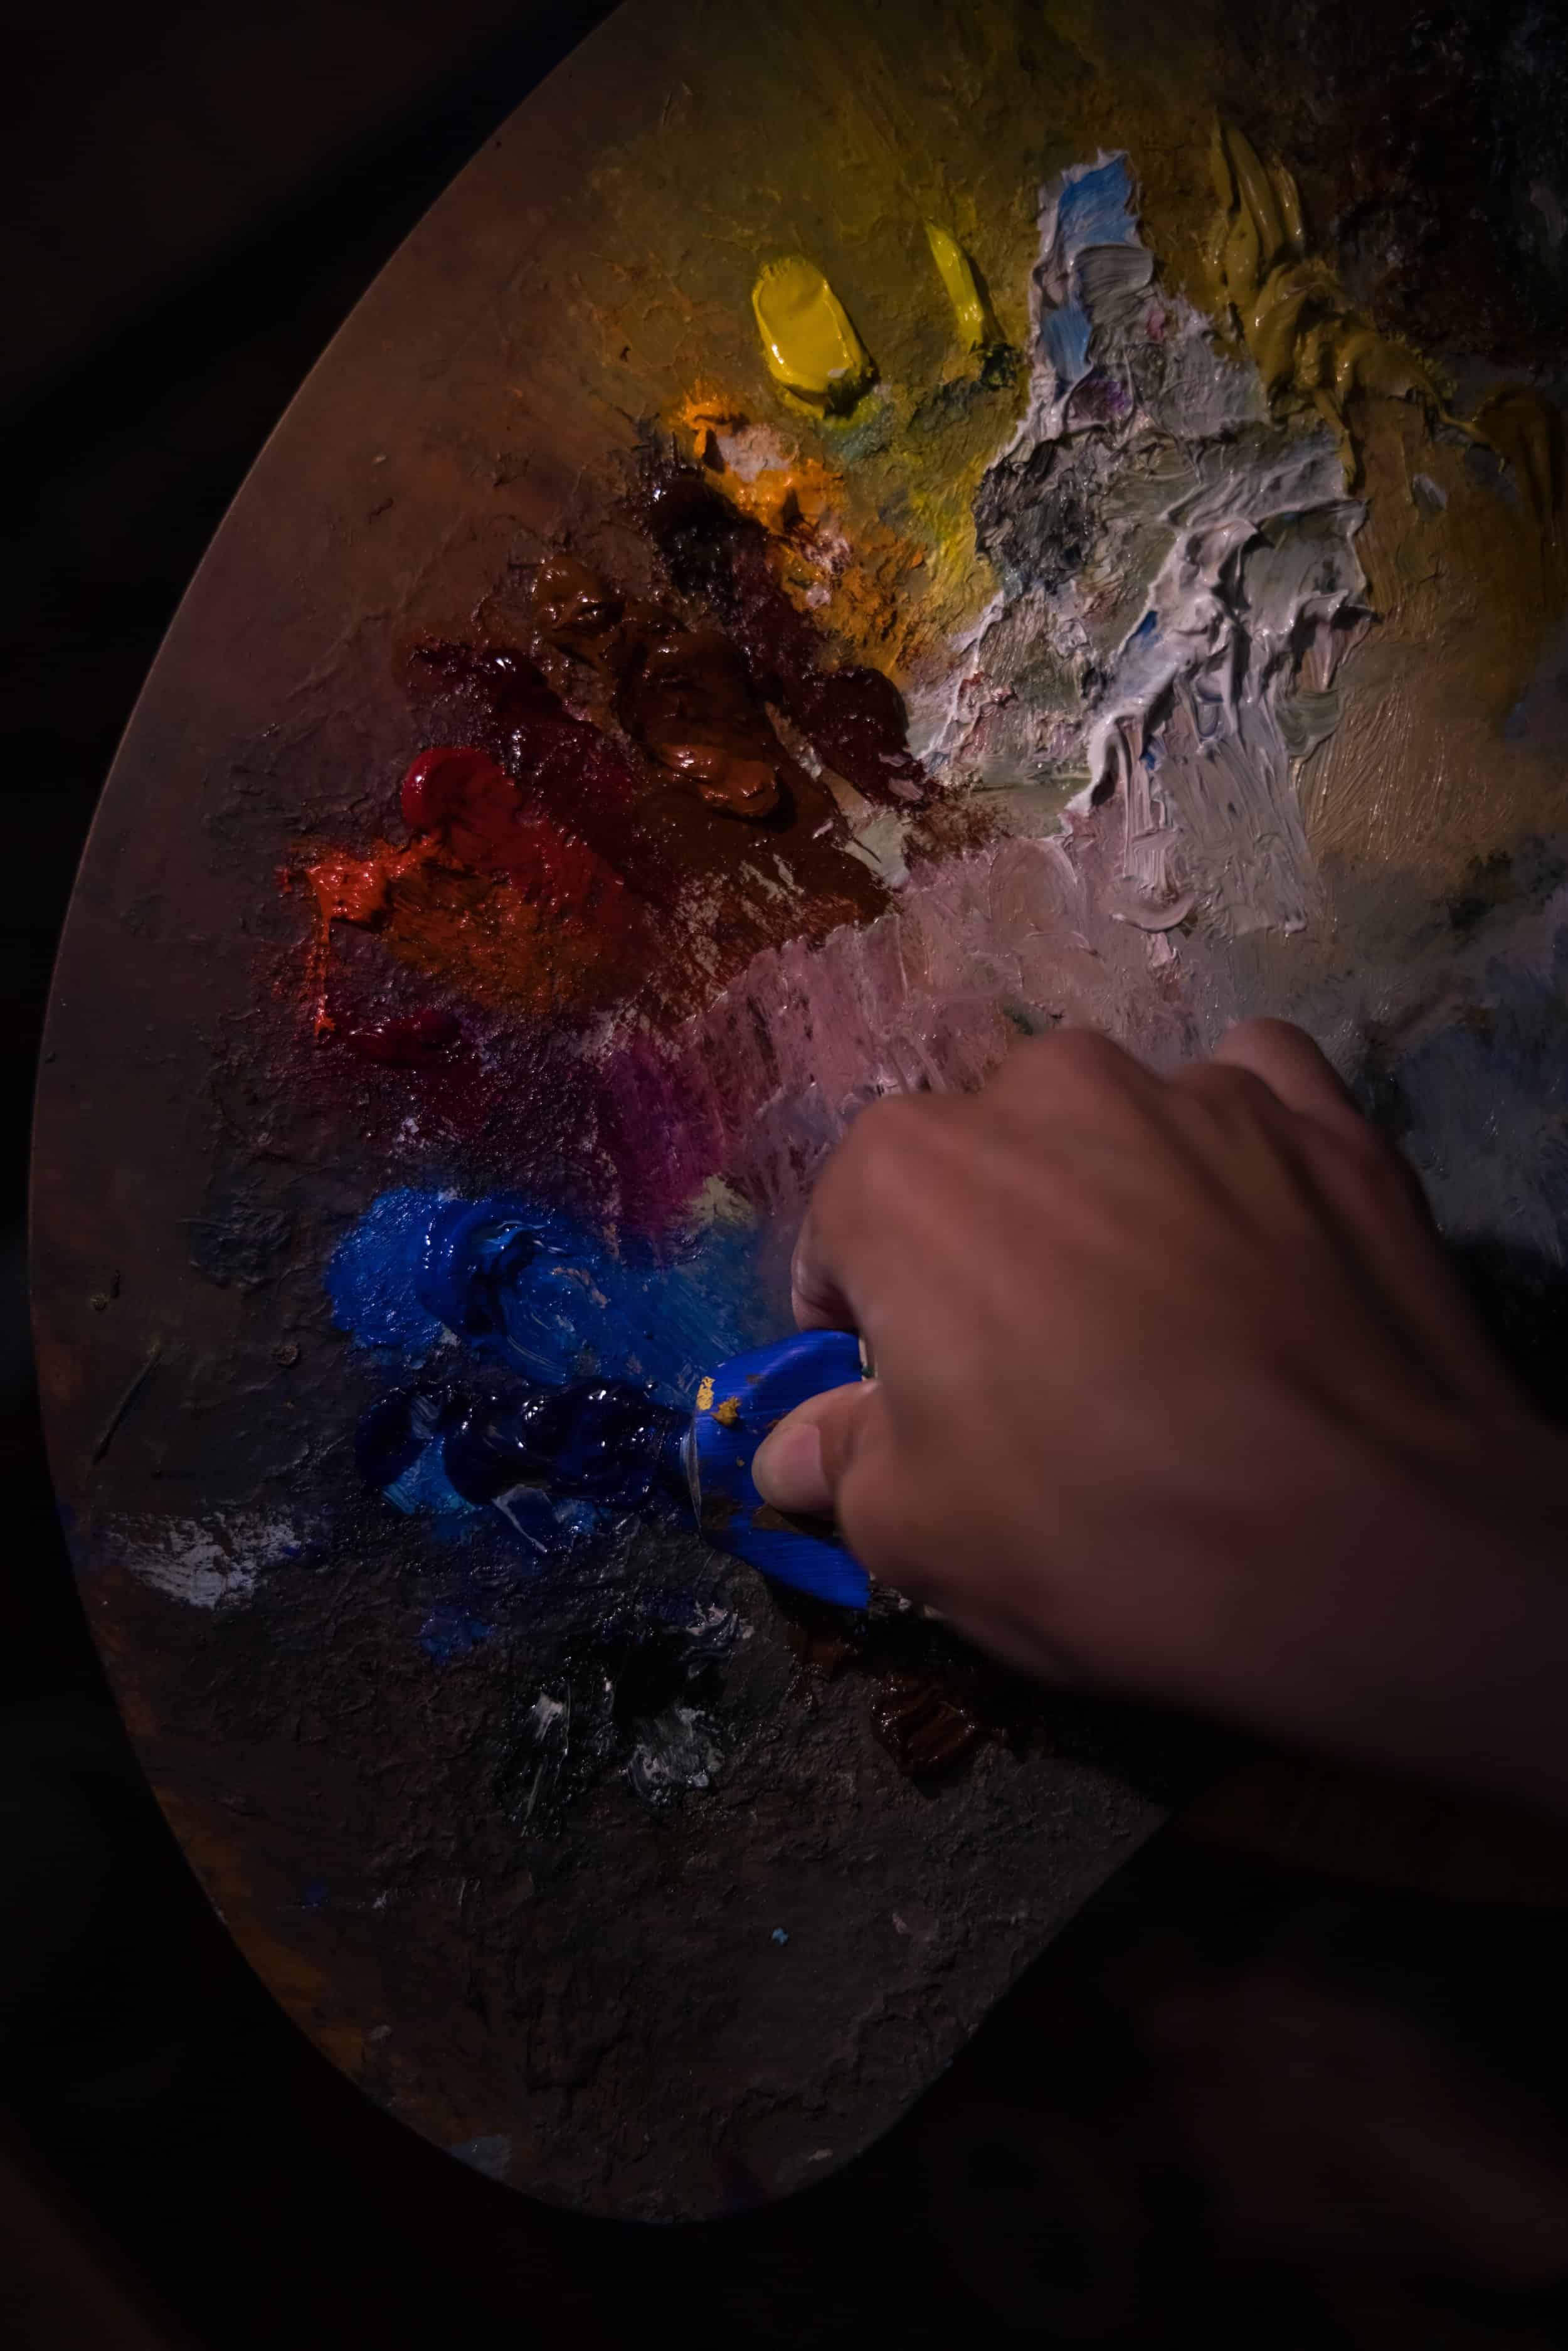 Hand squeezing paint onto palette